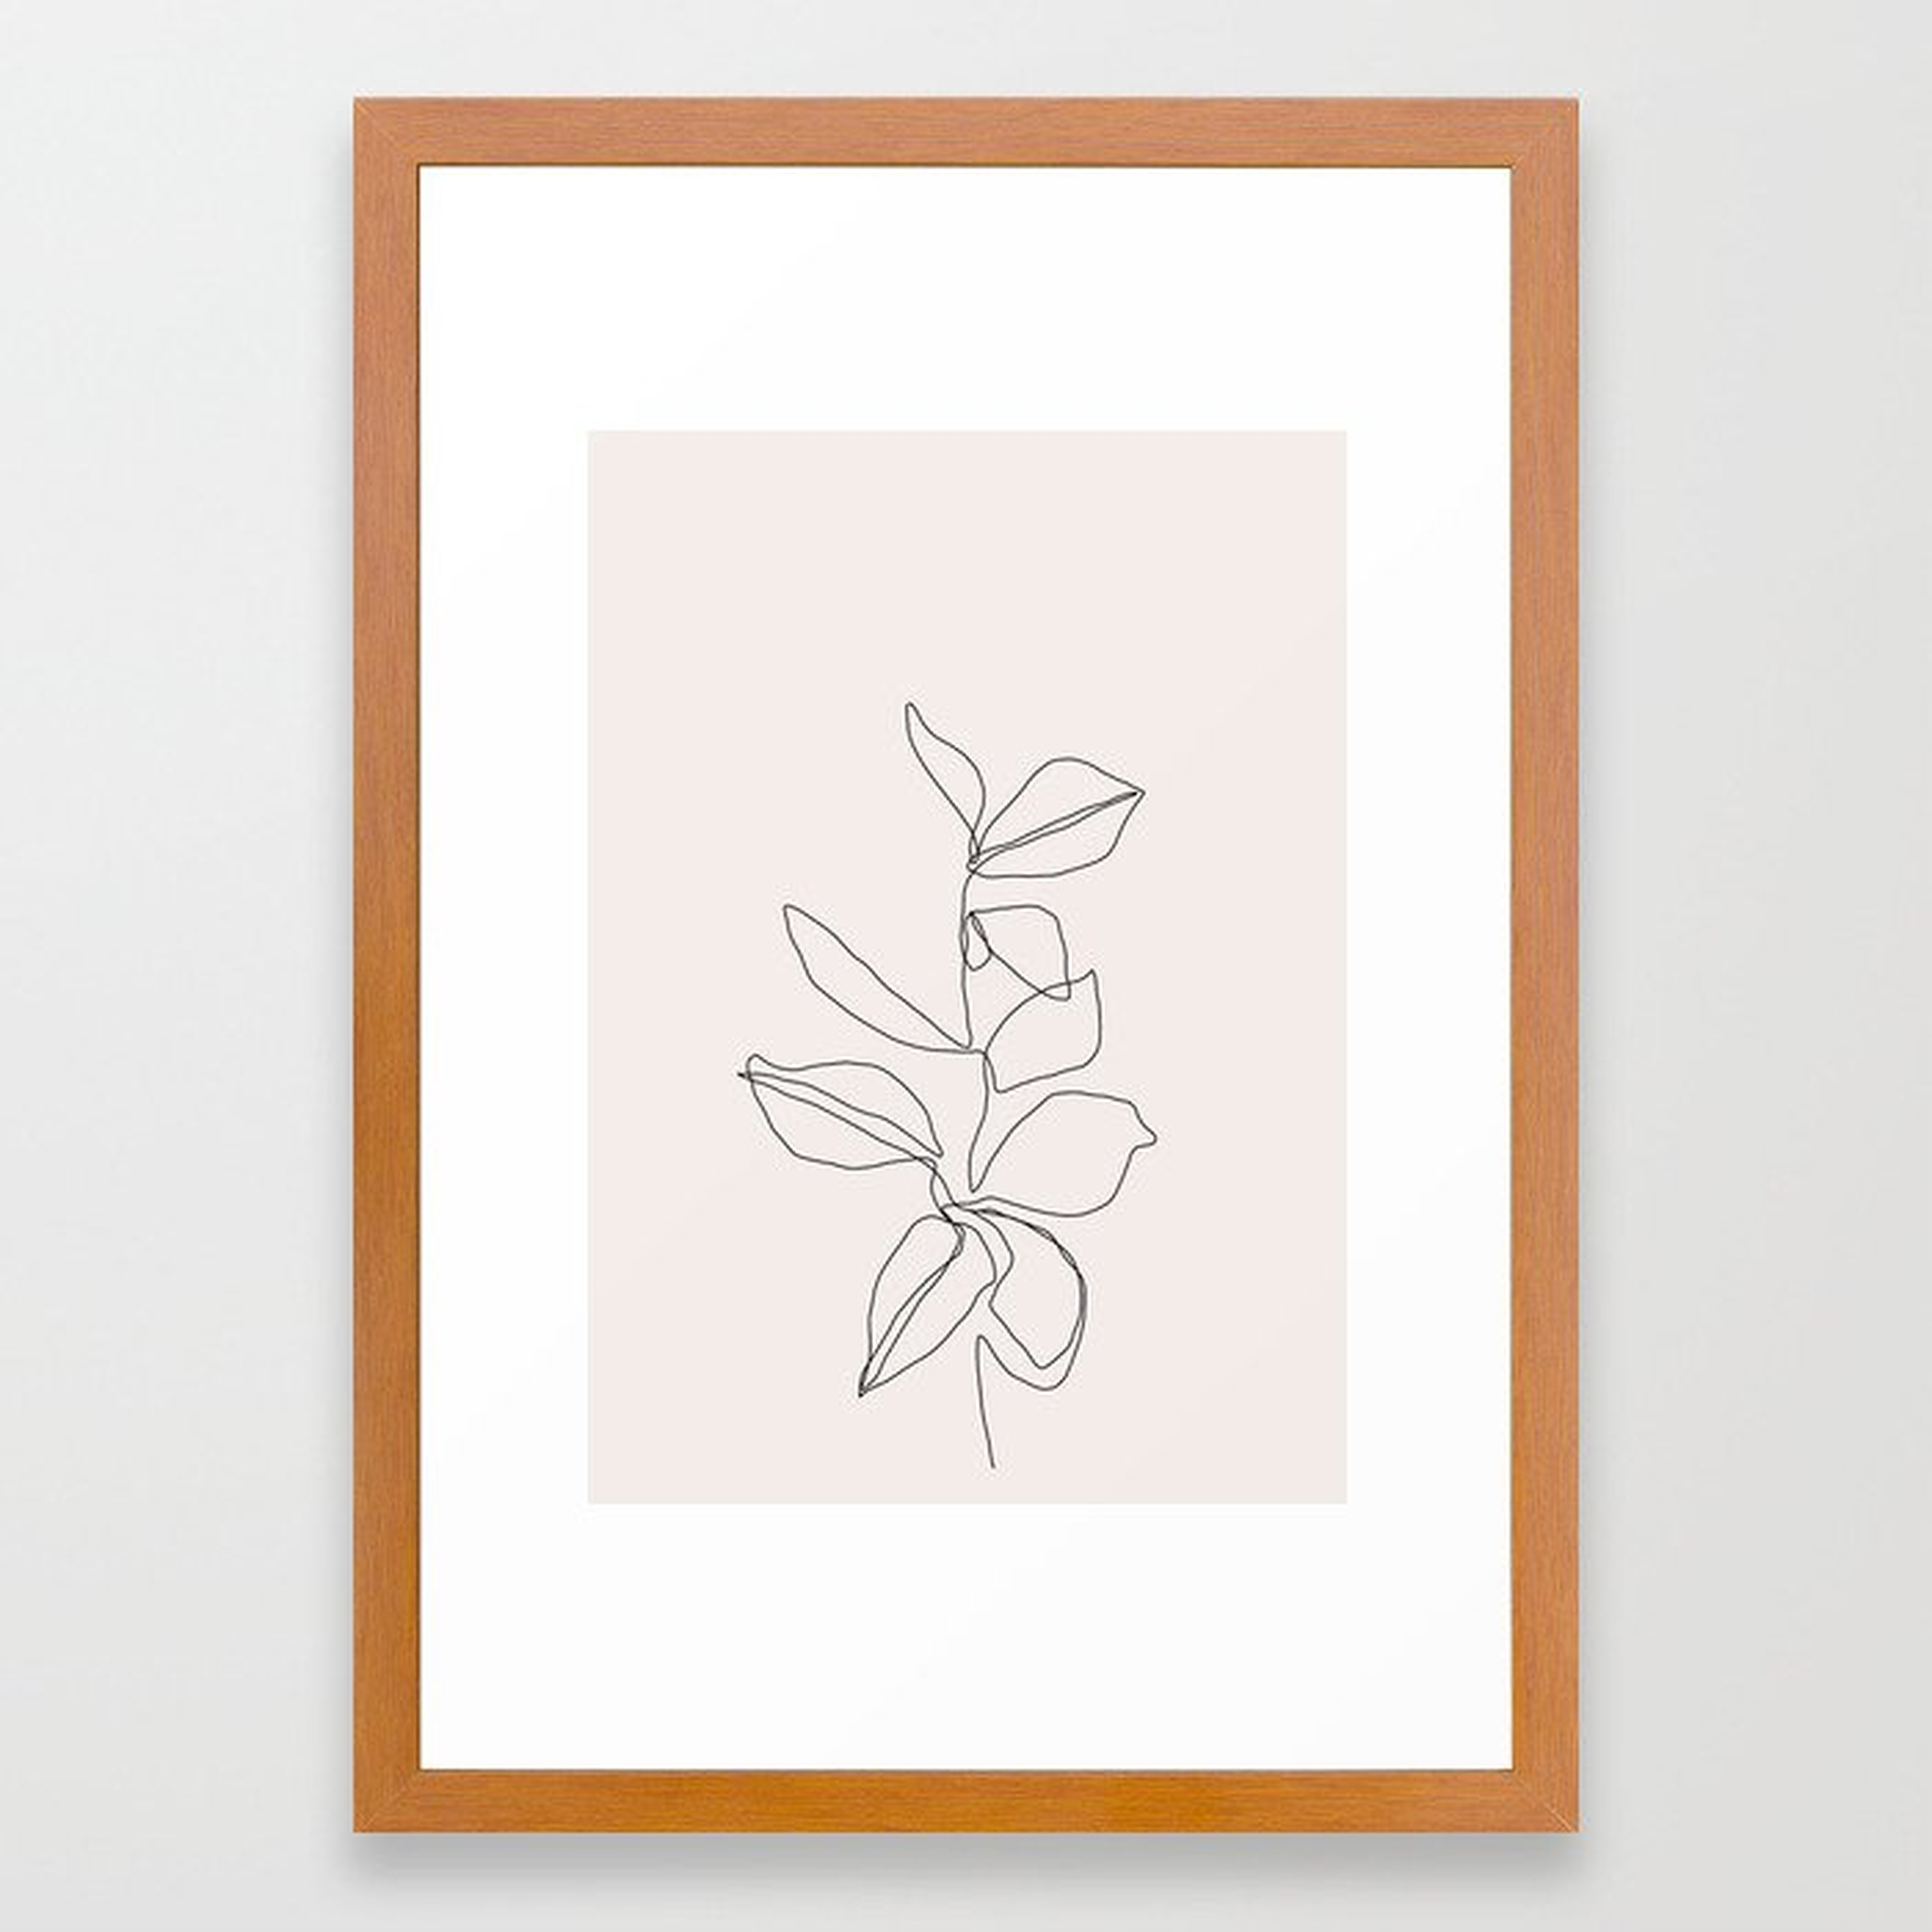 Botanical Illustration Line Drawing - Birdie I Framed Art Print by The Colour Study - Conservation Pecan - SMALL-15x21 - Society6